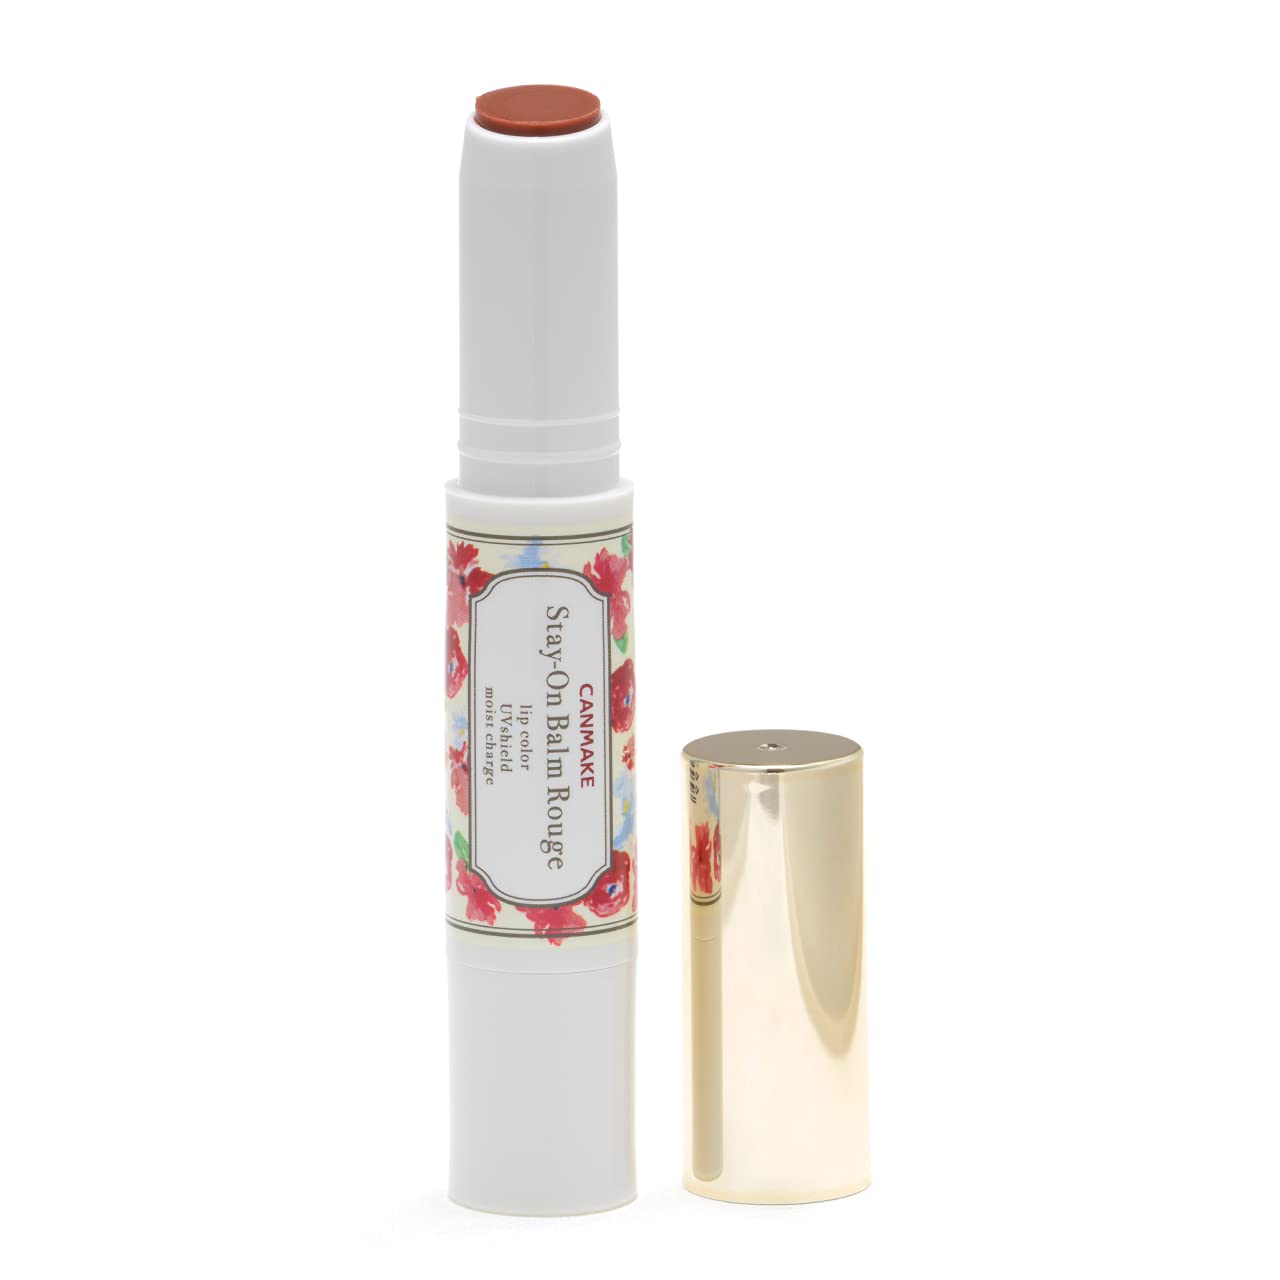 Canmake Stay - On Balm Rouge T04 Chocolate Lily 2.5G Long Lasting Lip Balm